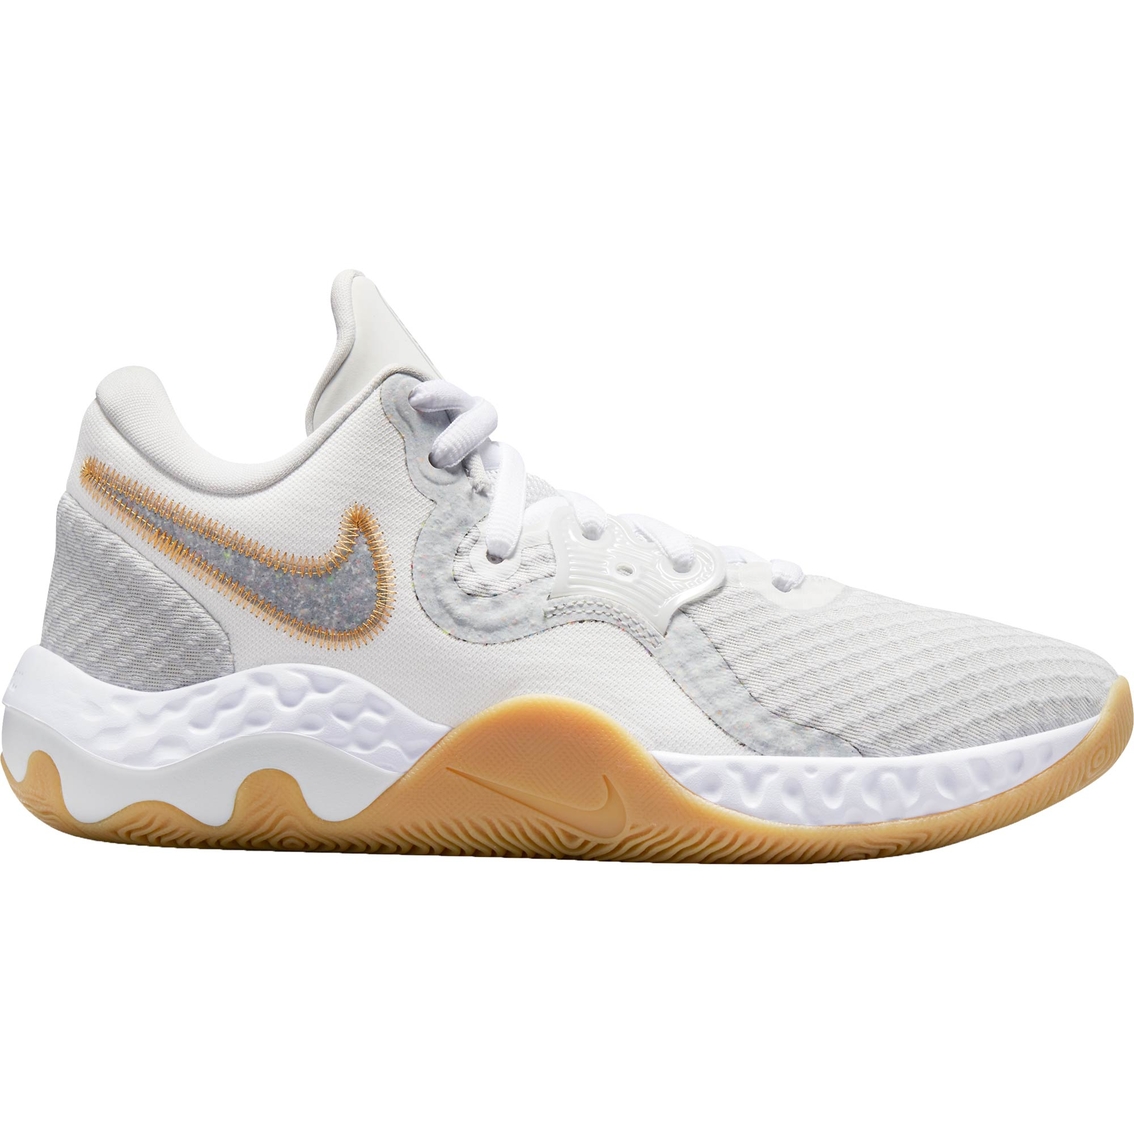 Nike Men's Renew Elevate 2 Basketball Shoes - Image 2 of 10